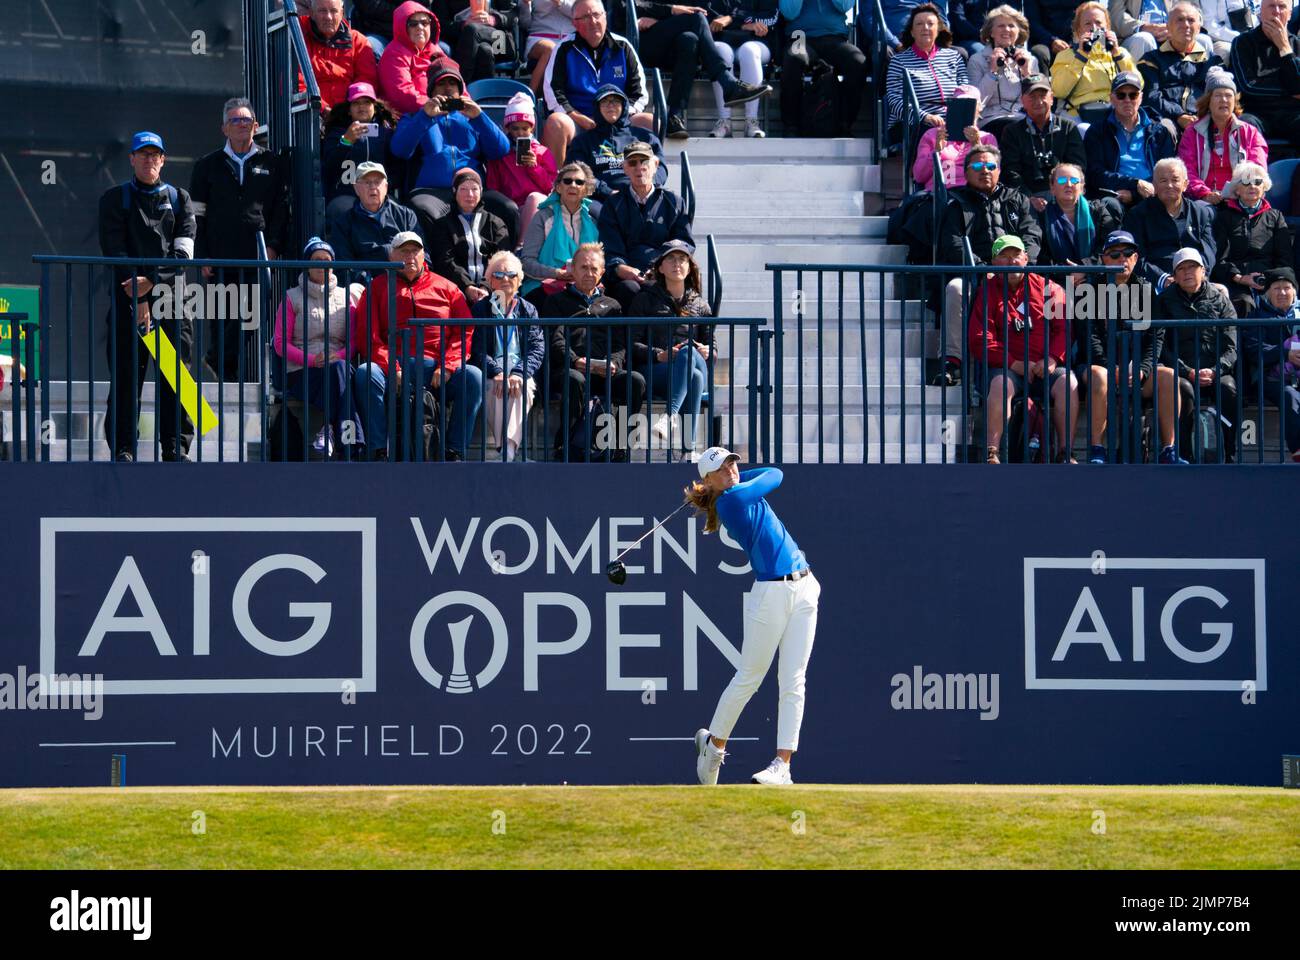 Gullane, Scotland, UK. 7th August 2022. Final  round of the AIG Women’s Open golf championship at Muirfield in East Lothian. Pic; Louise Duncan of Scotland drives off the first tee. Iain Masterton/Alamy Live News Stock Photo